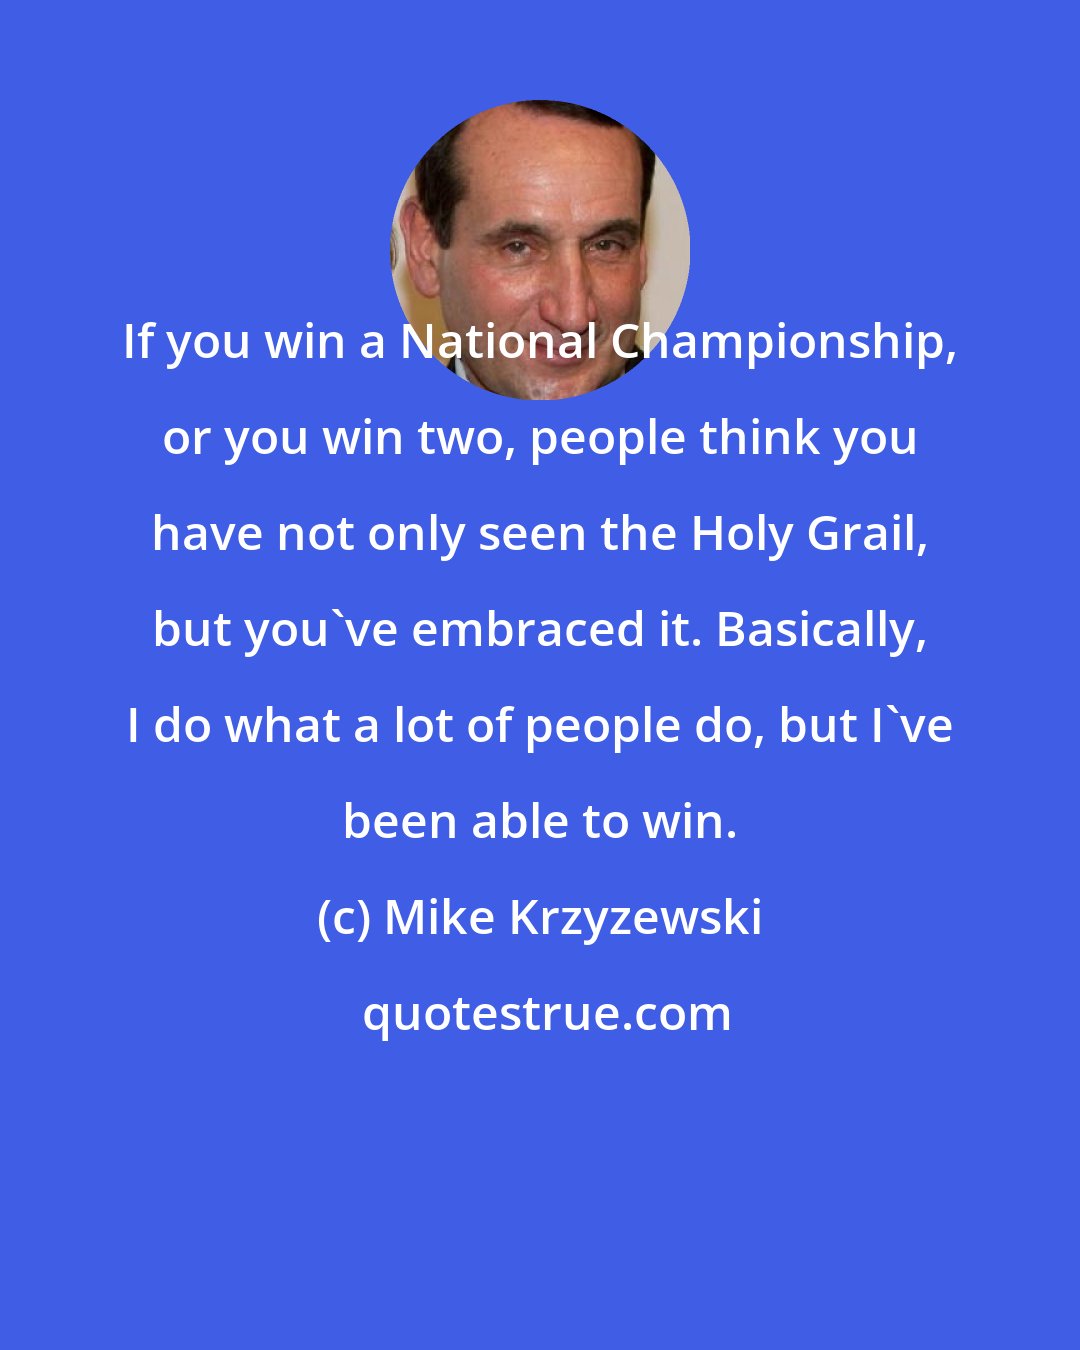 Mike Krzyzewski: If you win a National Championship, or you win two, people think you have not only seen the Holy Grail, but you've embraced it. Basically, I do what a lot of people do, but I've been able to win.